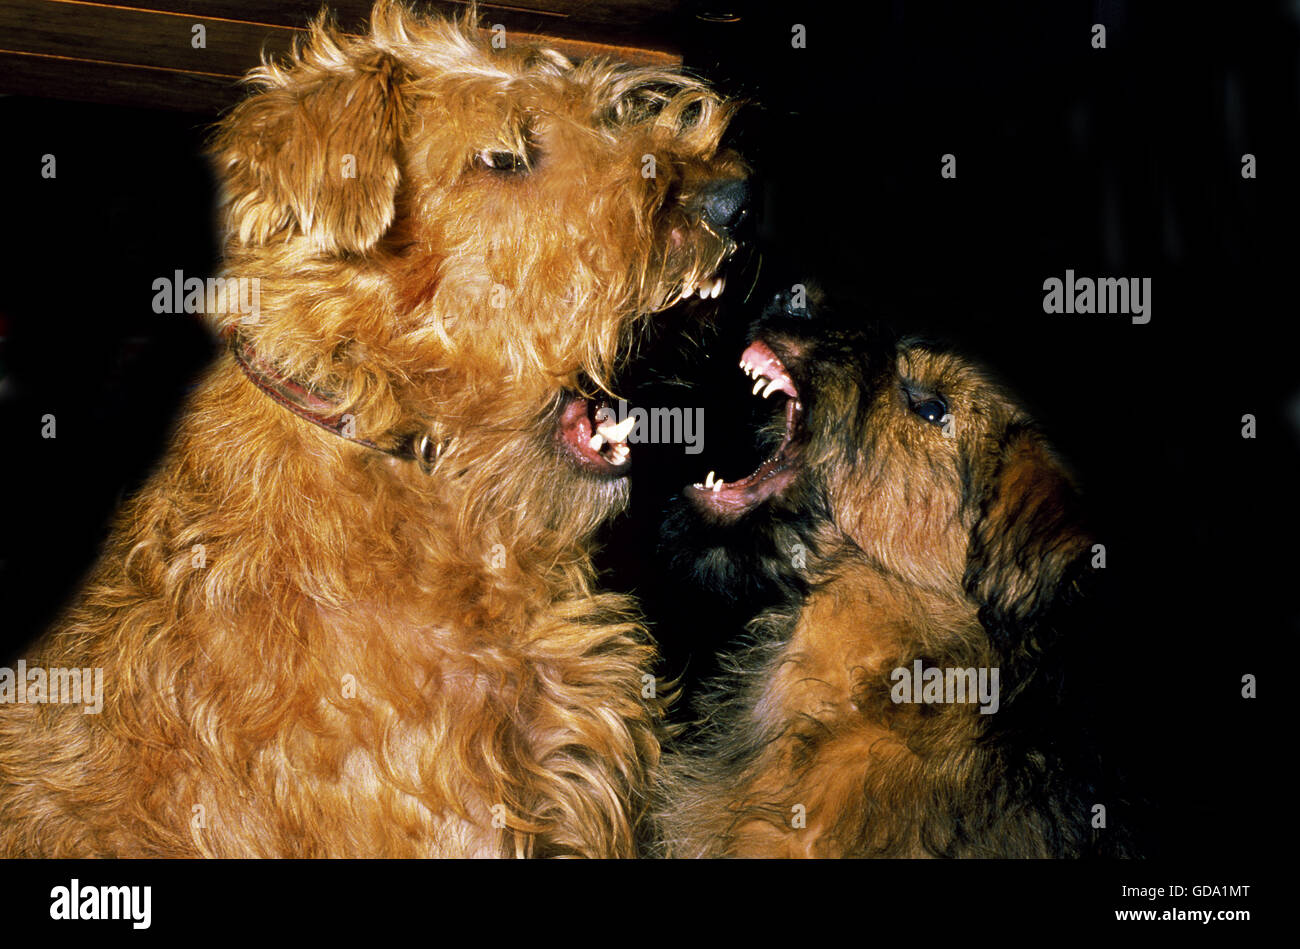 Irish Terrier, Adult and Pup snarling, Aggressive Posture Stock Photo